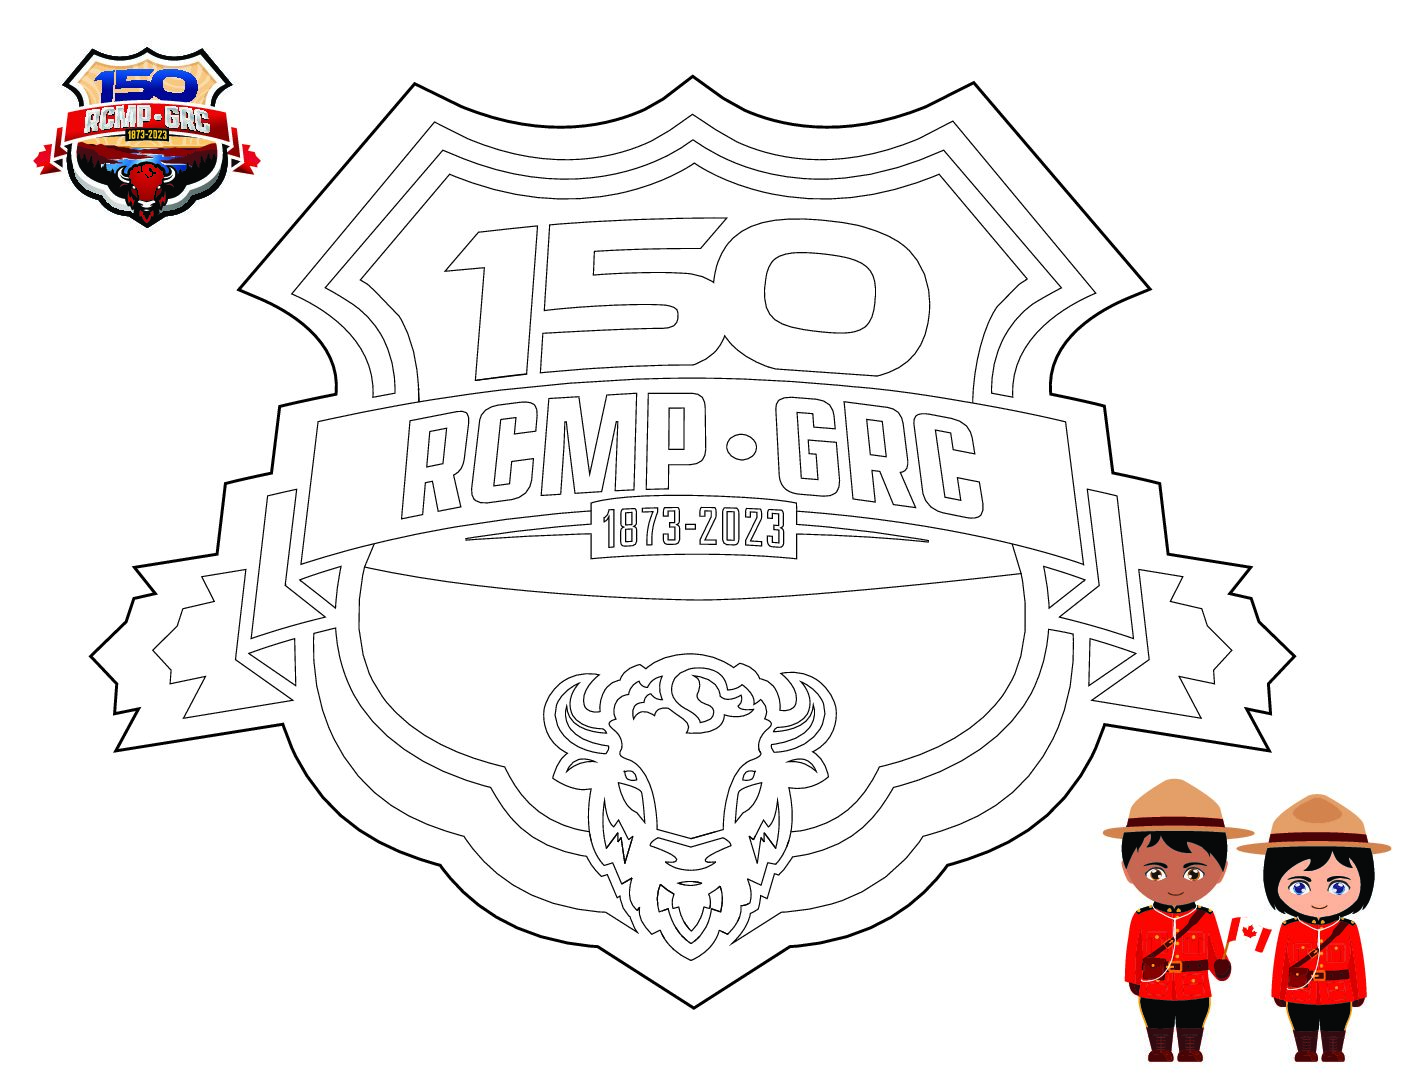 Bonnyville RCMP celebrate 150th Anniversary with colouring contest